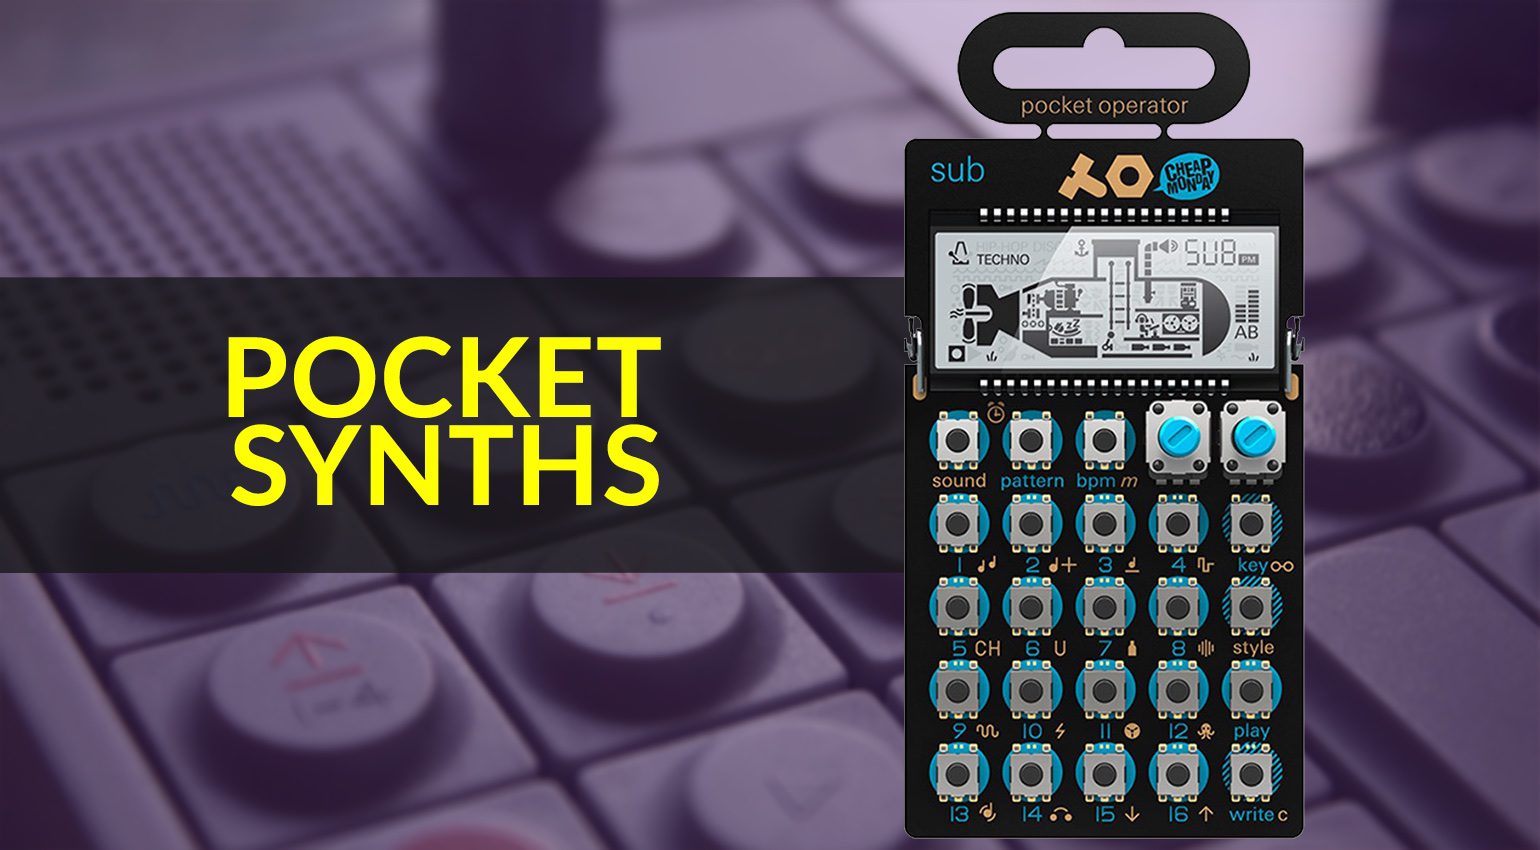 Can You Build An Open Source Pocket Operator?